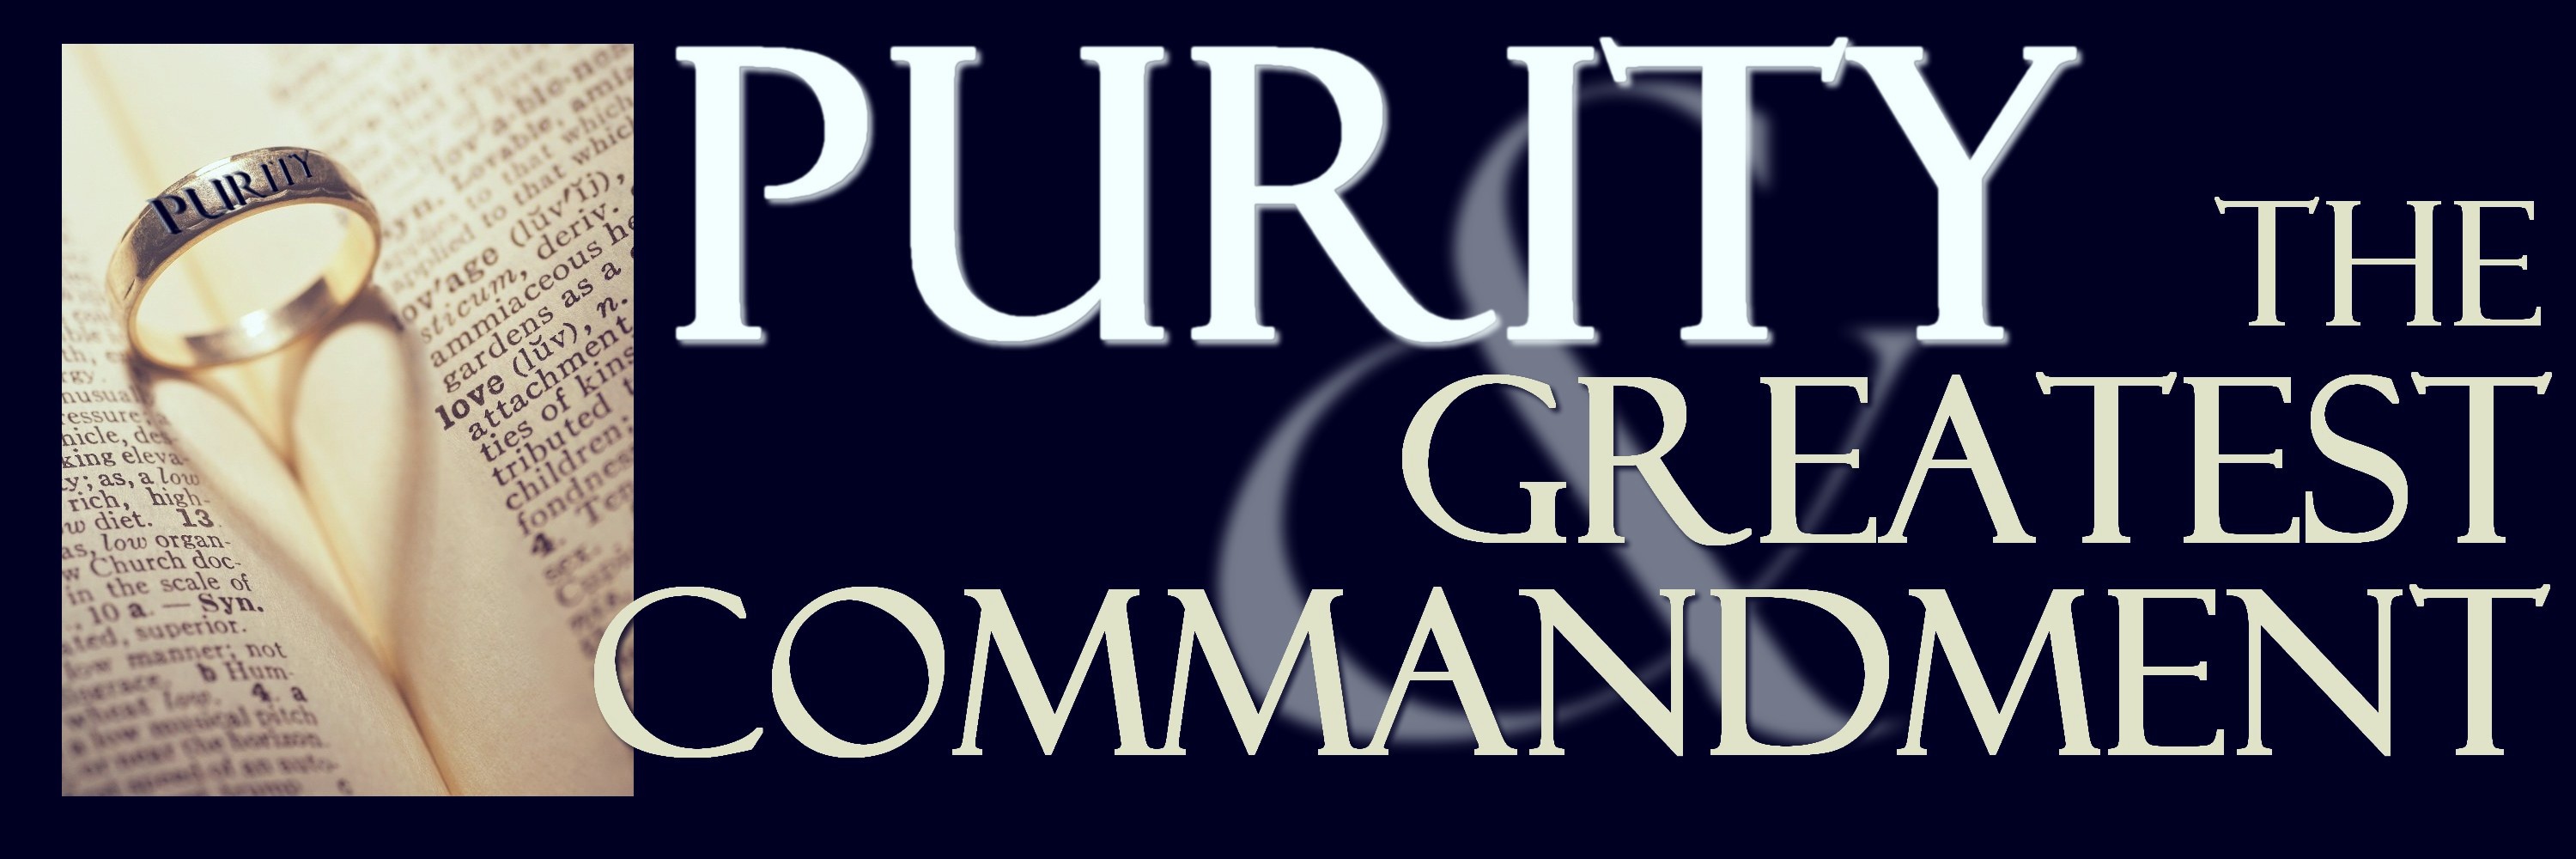 purity-and-the-greatest-commandment-2